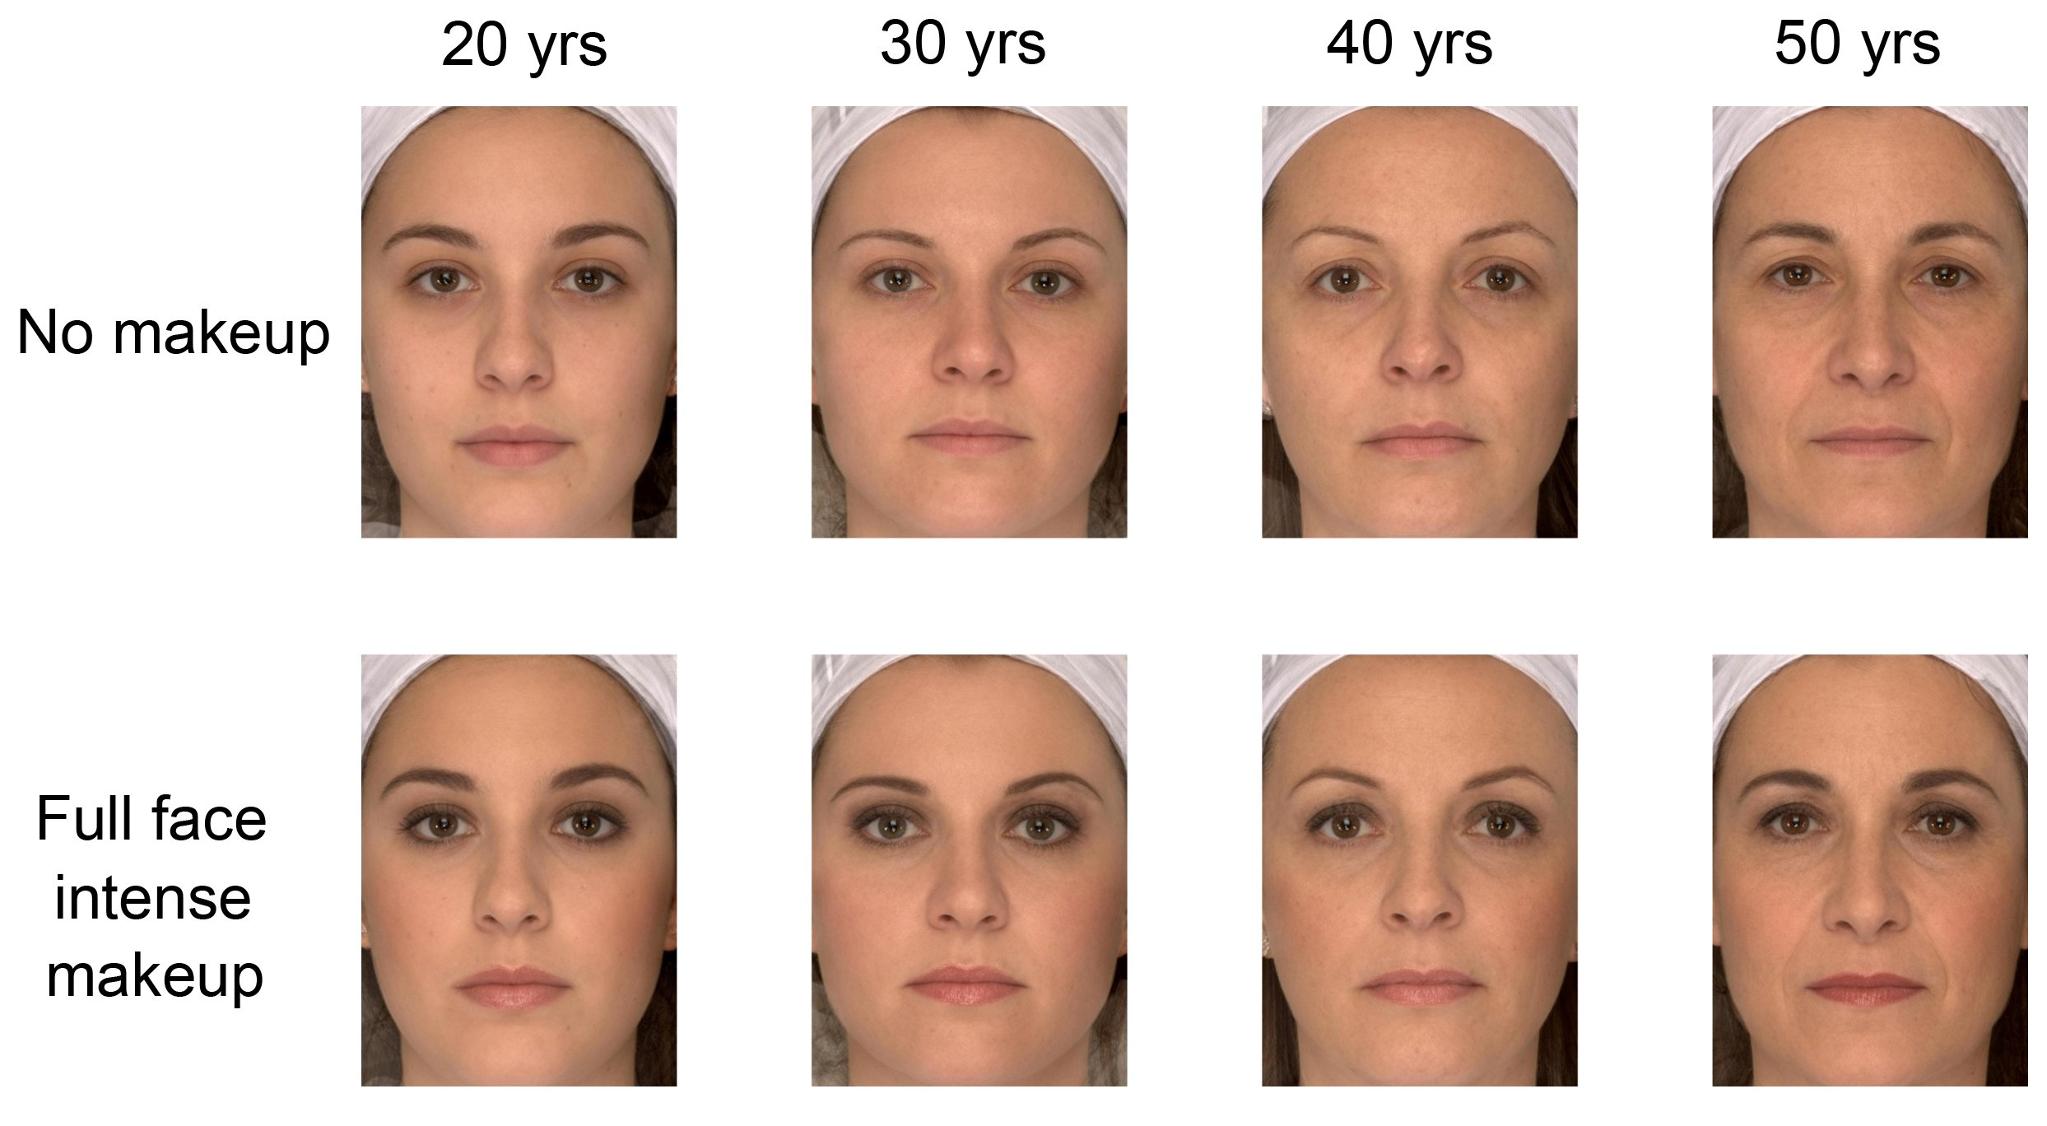 Scientific American on X: Study shows that middle-aged faces look